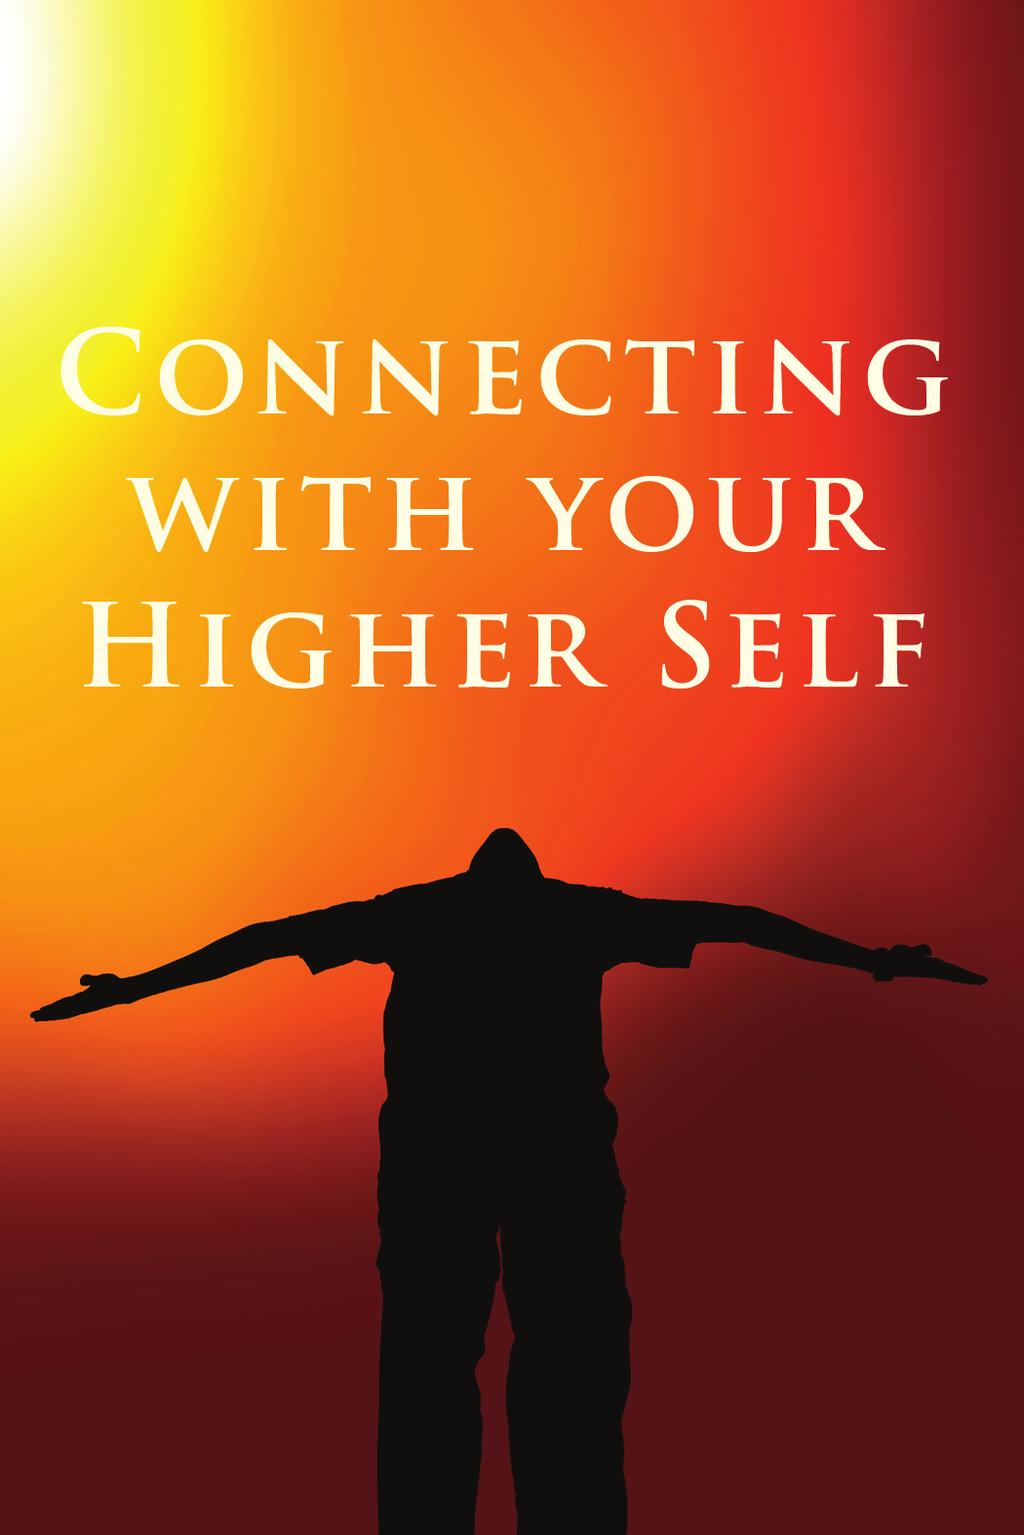 What Is Your Higher Self? Your Higher Self is your Soul Self. It is the ancient, infinitely wise part of you that was directly created from Divine Source.